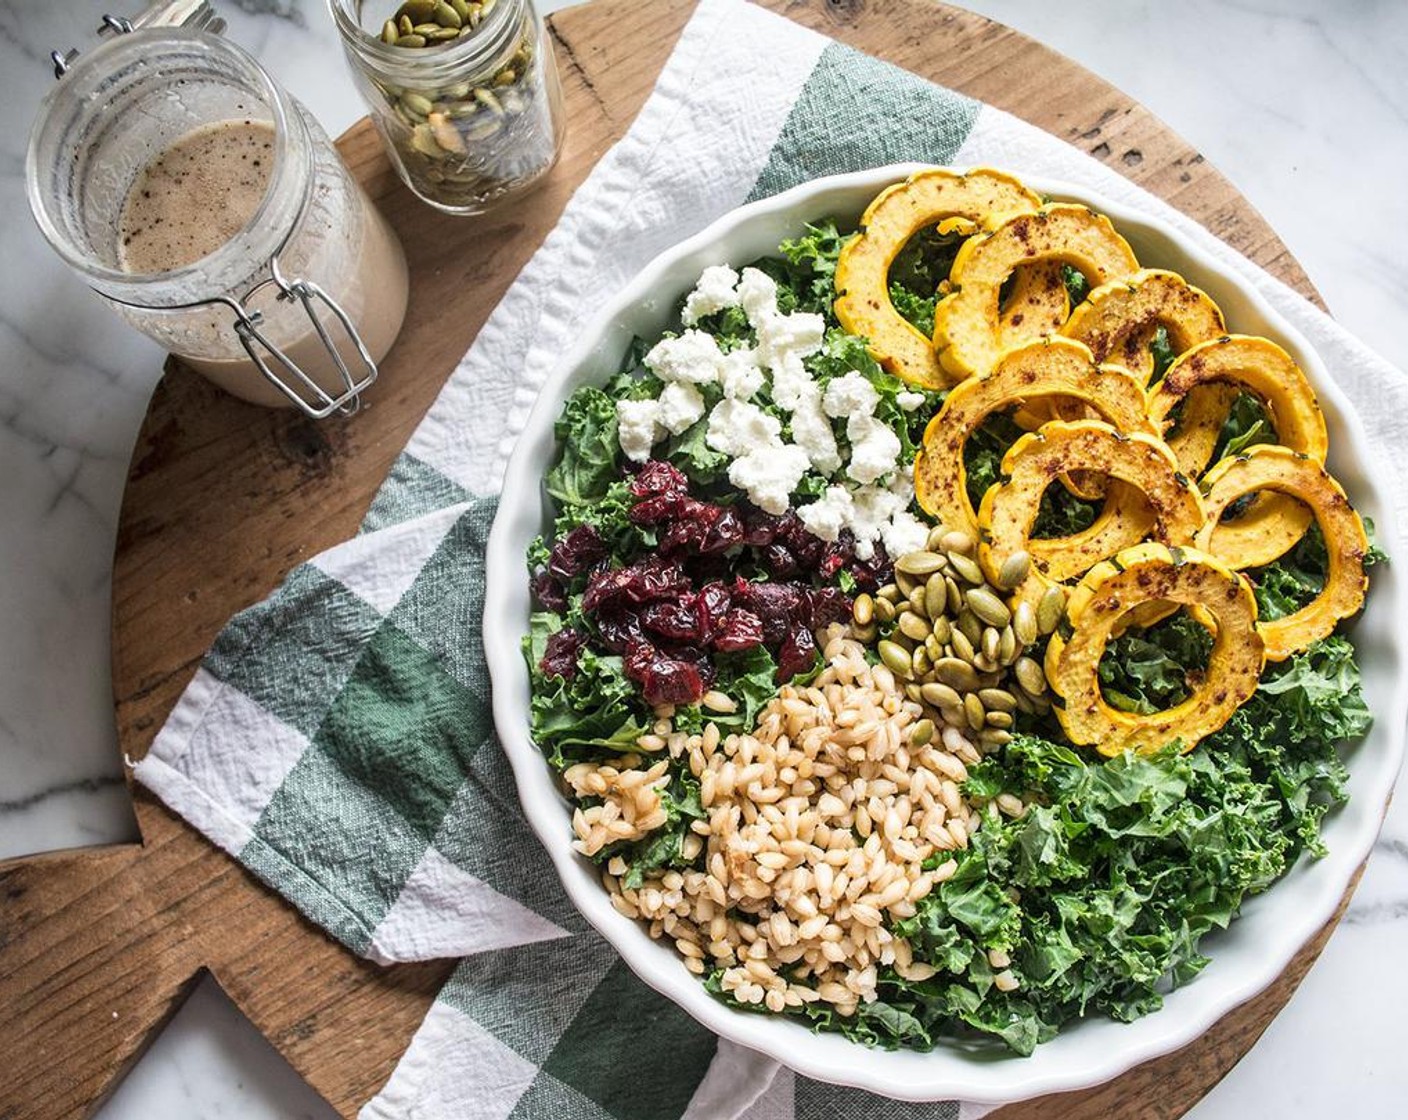 Kale Salad with Roasted Delicata Squash and Pearl Barley